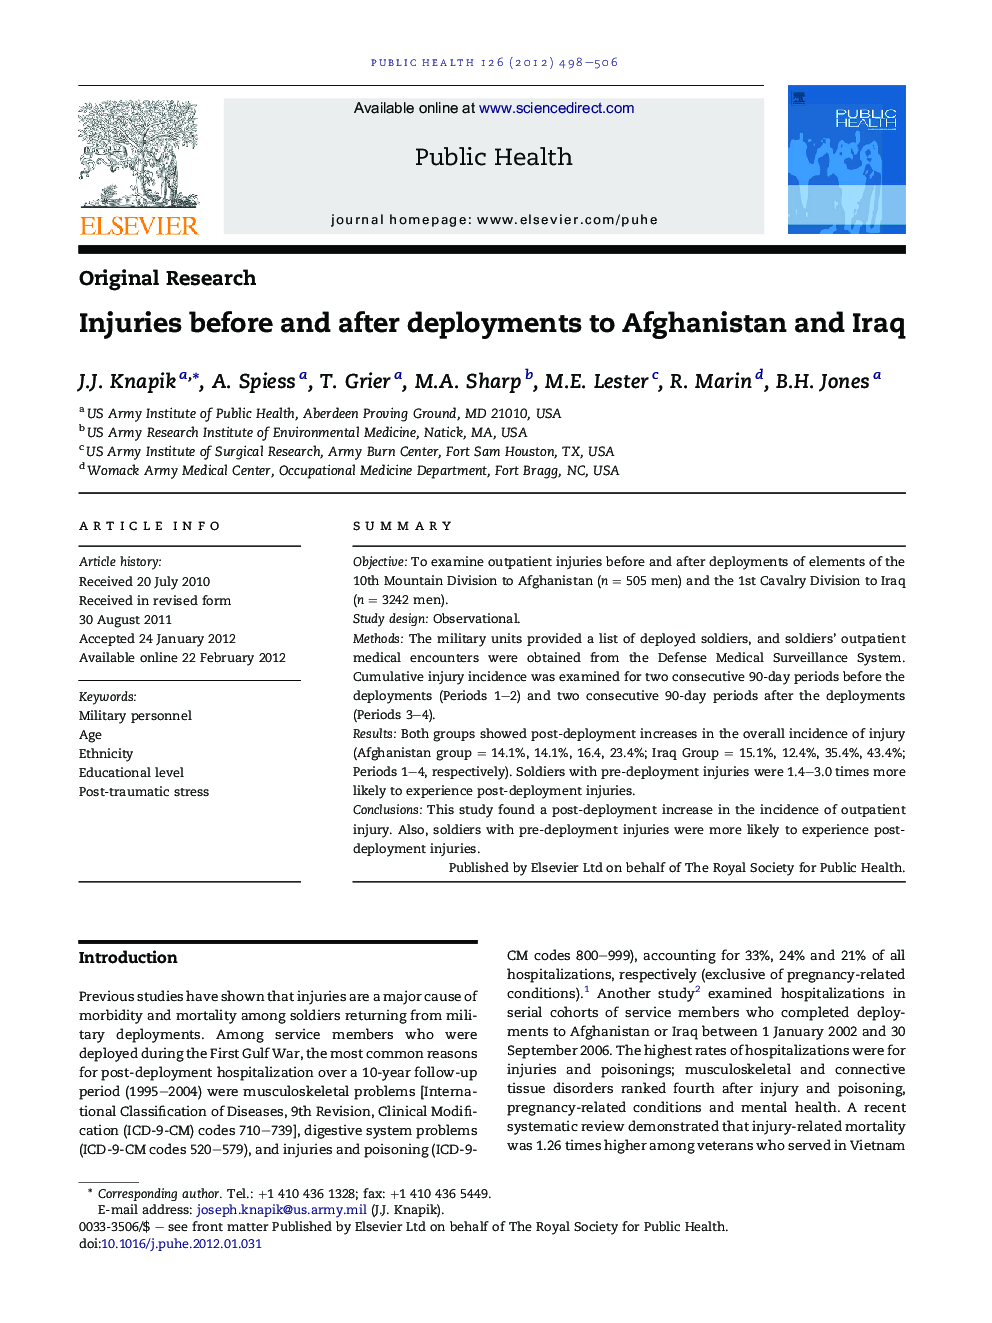 Injuries before and after deployments to Afghanistan and Iraq